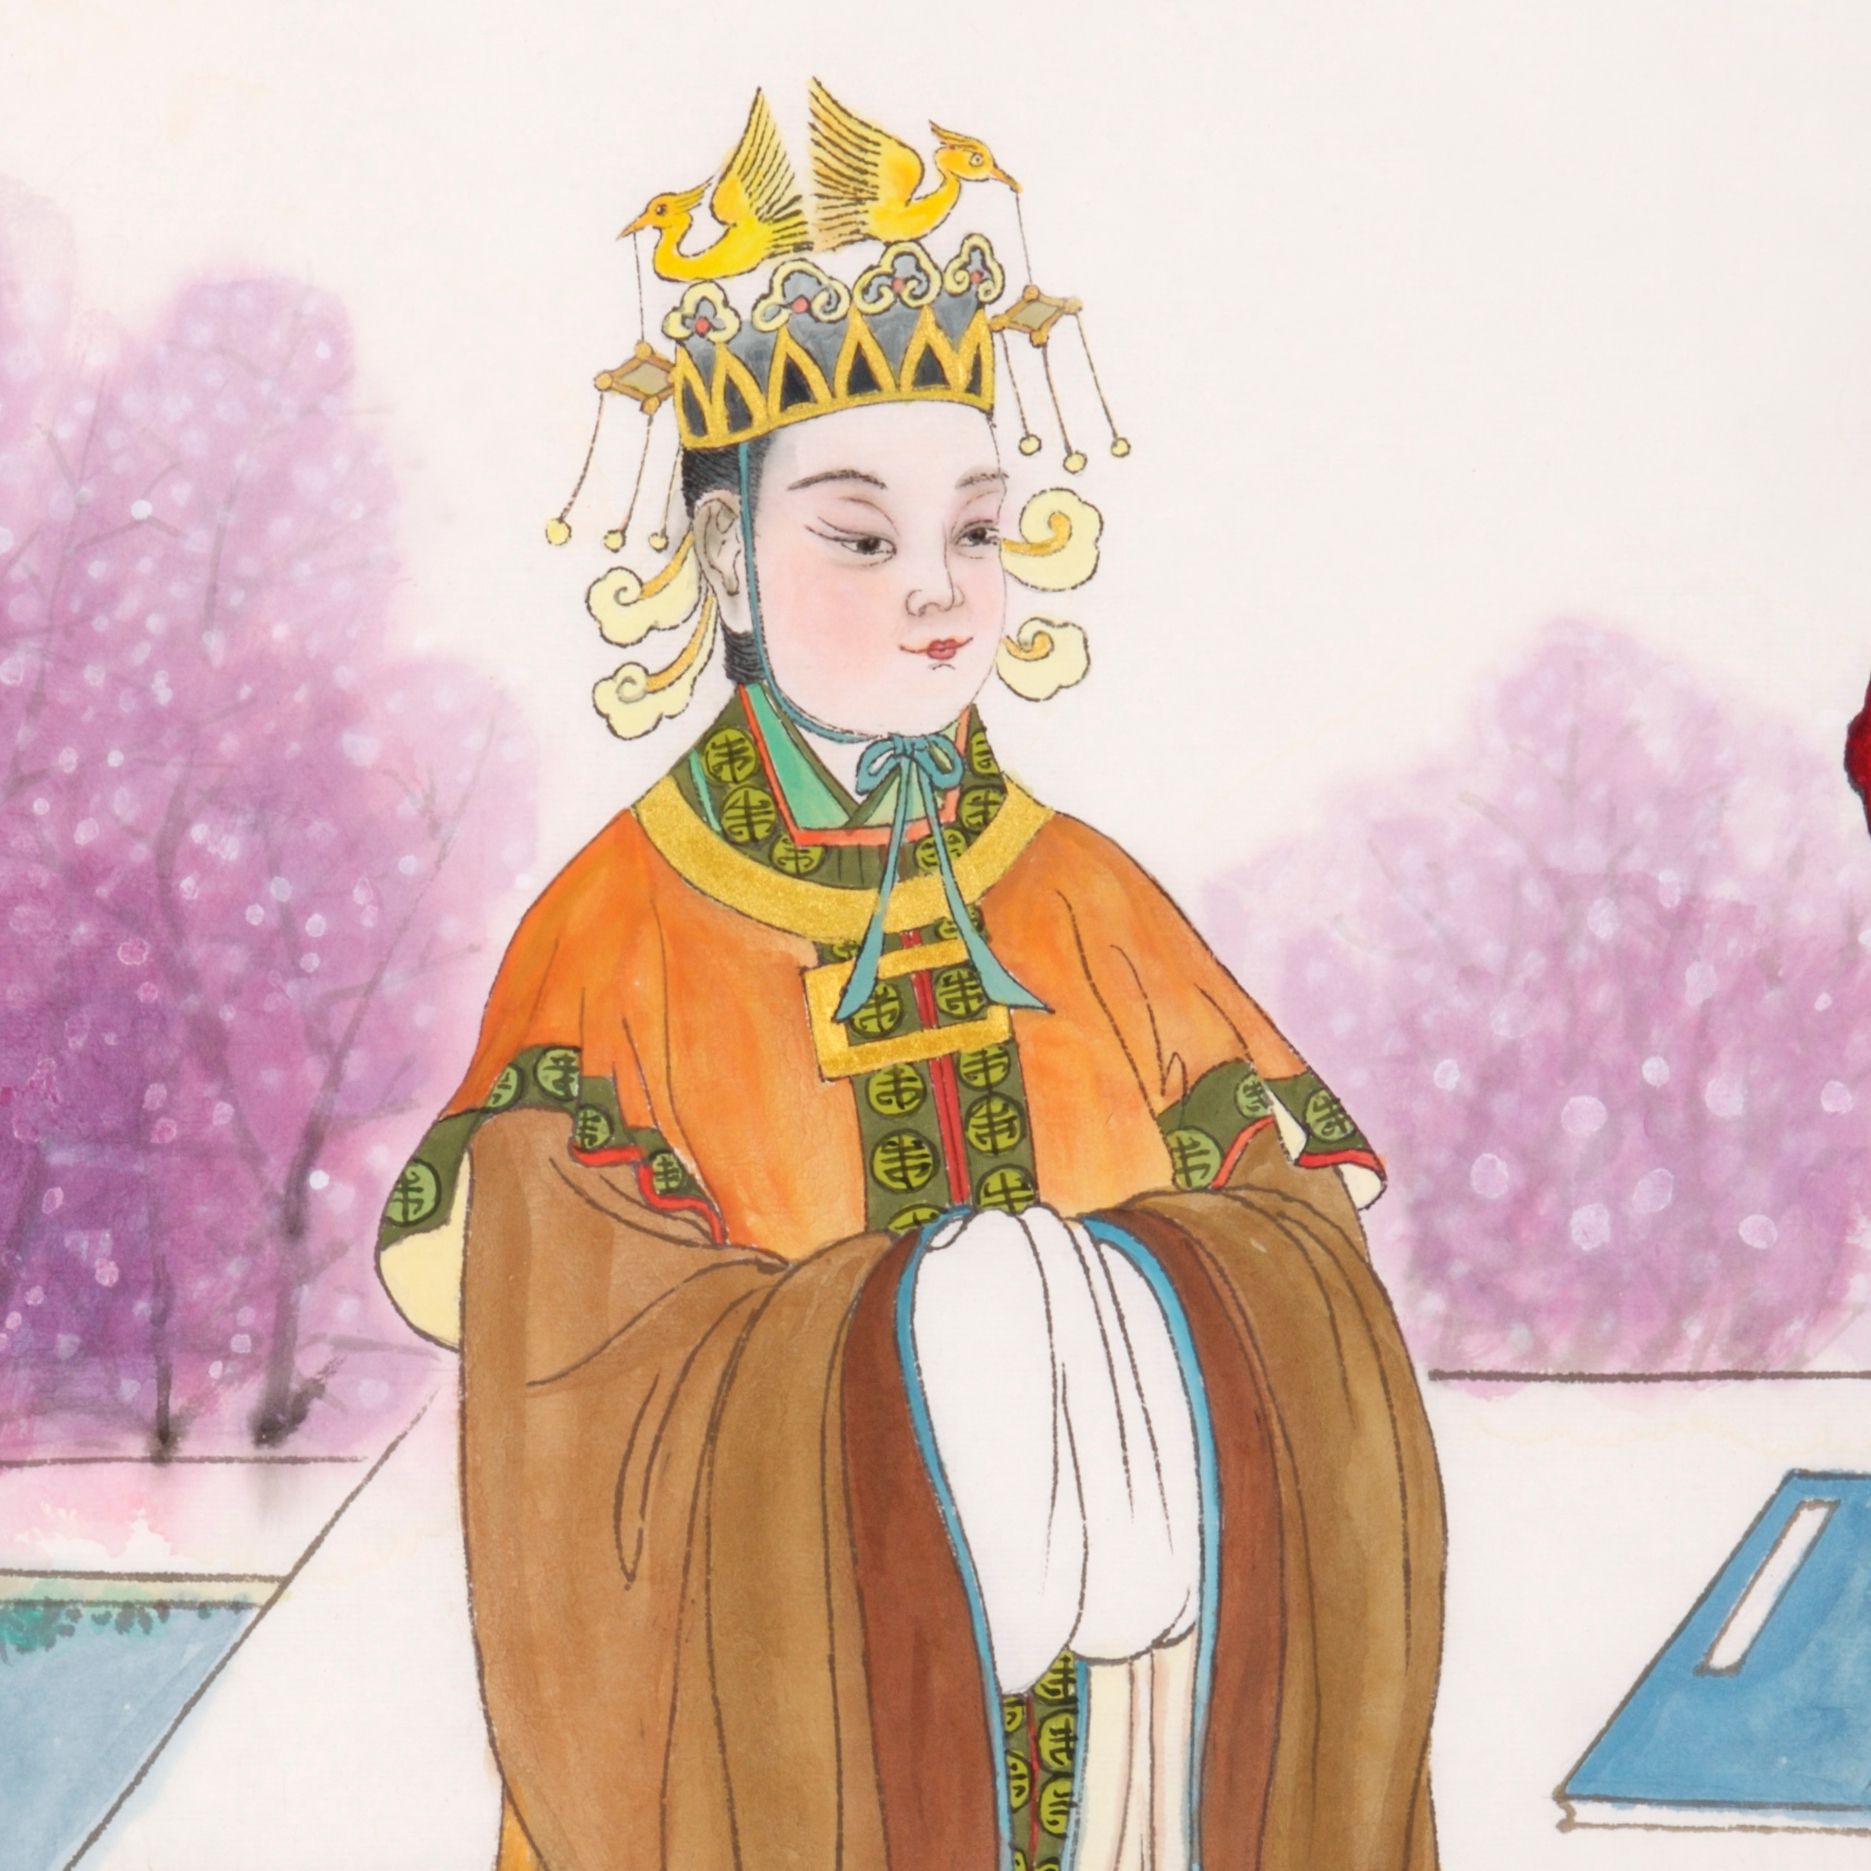 Wu Zetian: China's Only Female Emperor